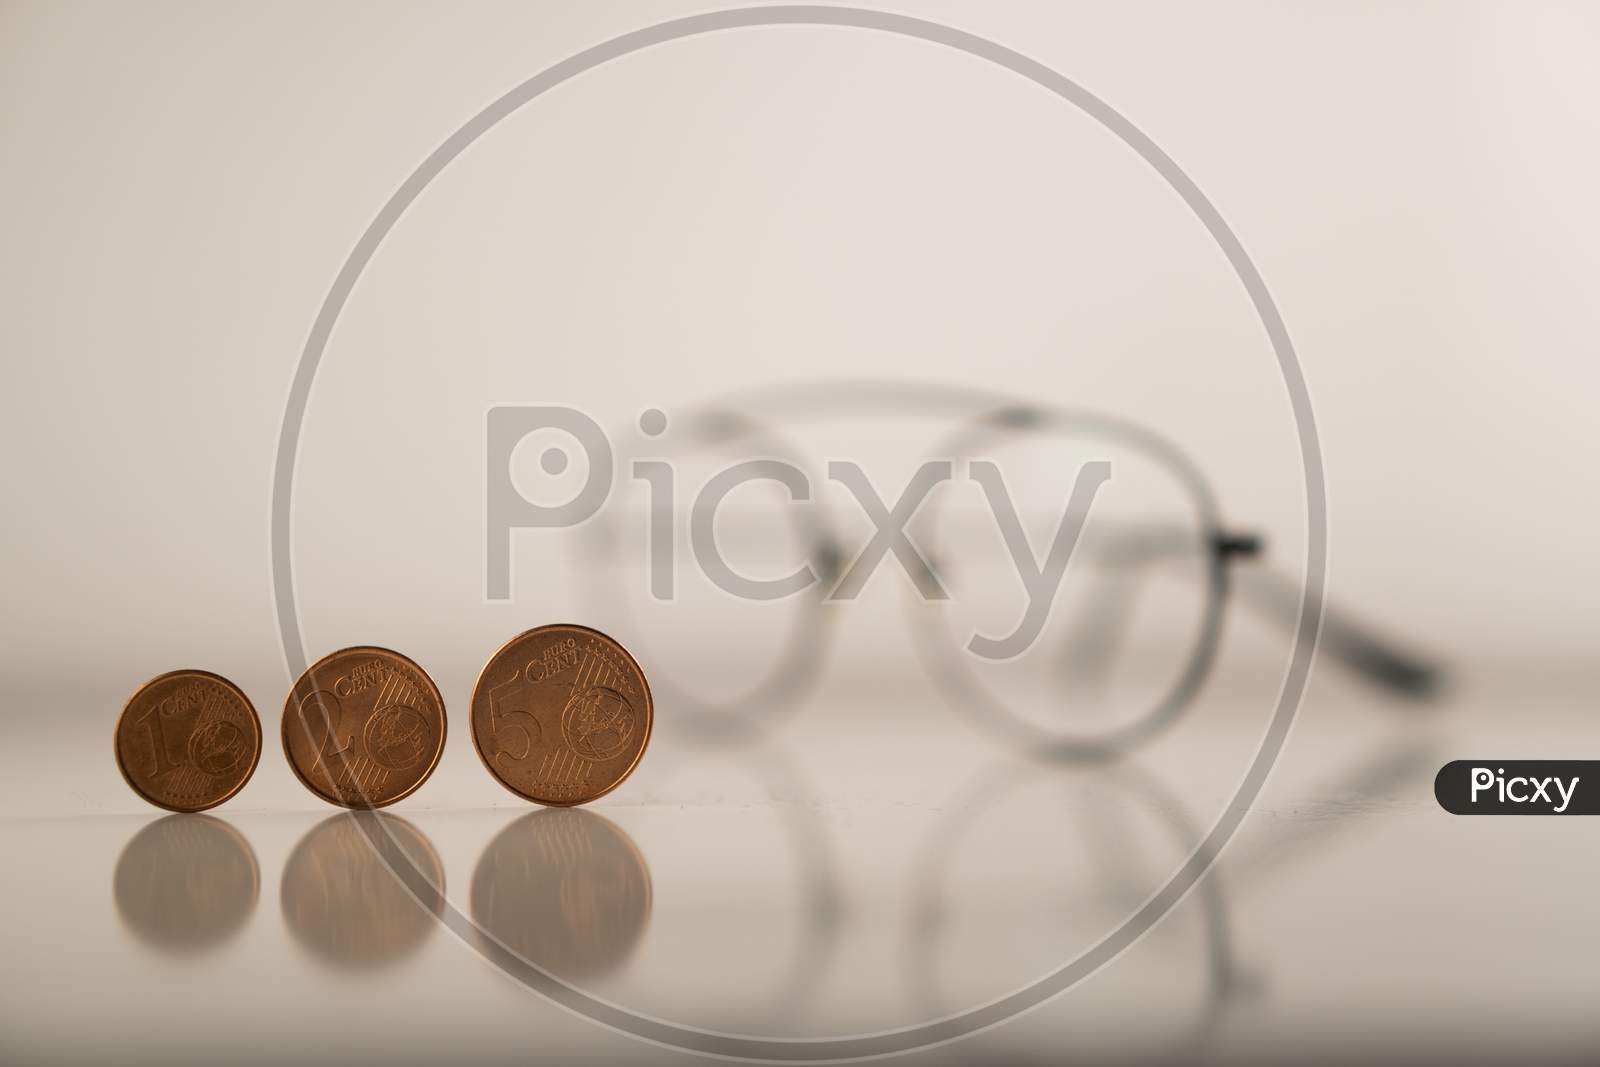 European cents (Coins) and a spectacle against a white background to highlight the collapsed World economy (Global recession) during Covid-19 (Coronavirus) pandemic through the vision of economists.